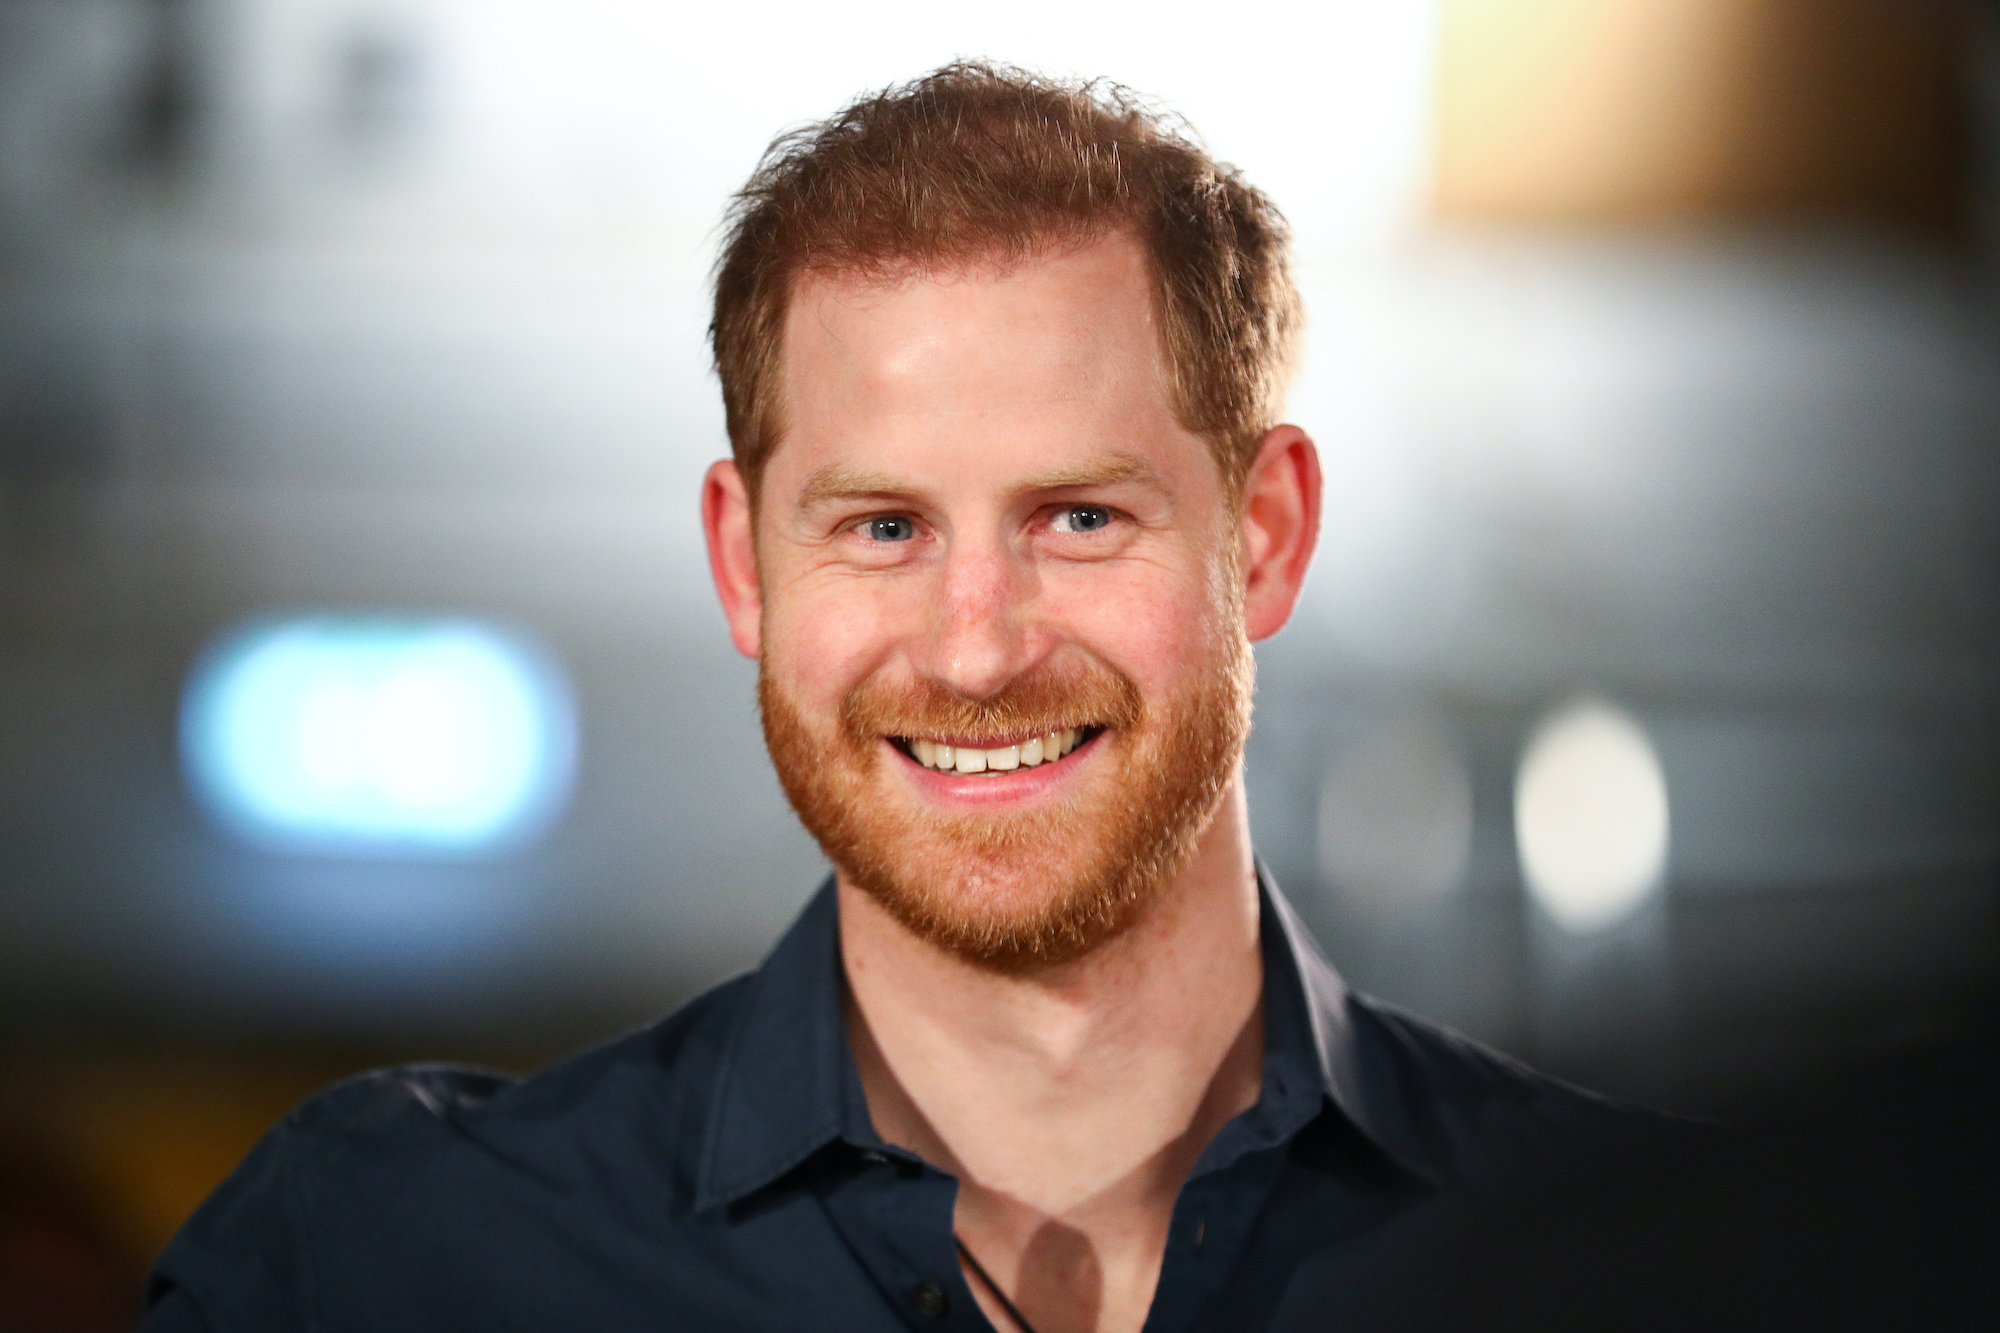 Smiling Prince Harry mental health advocate in front of a blurred background